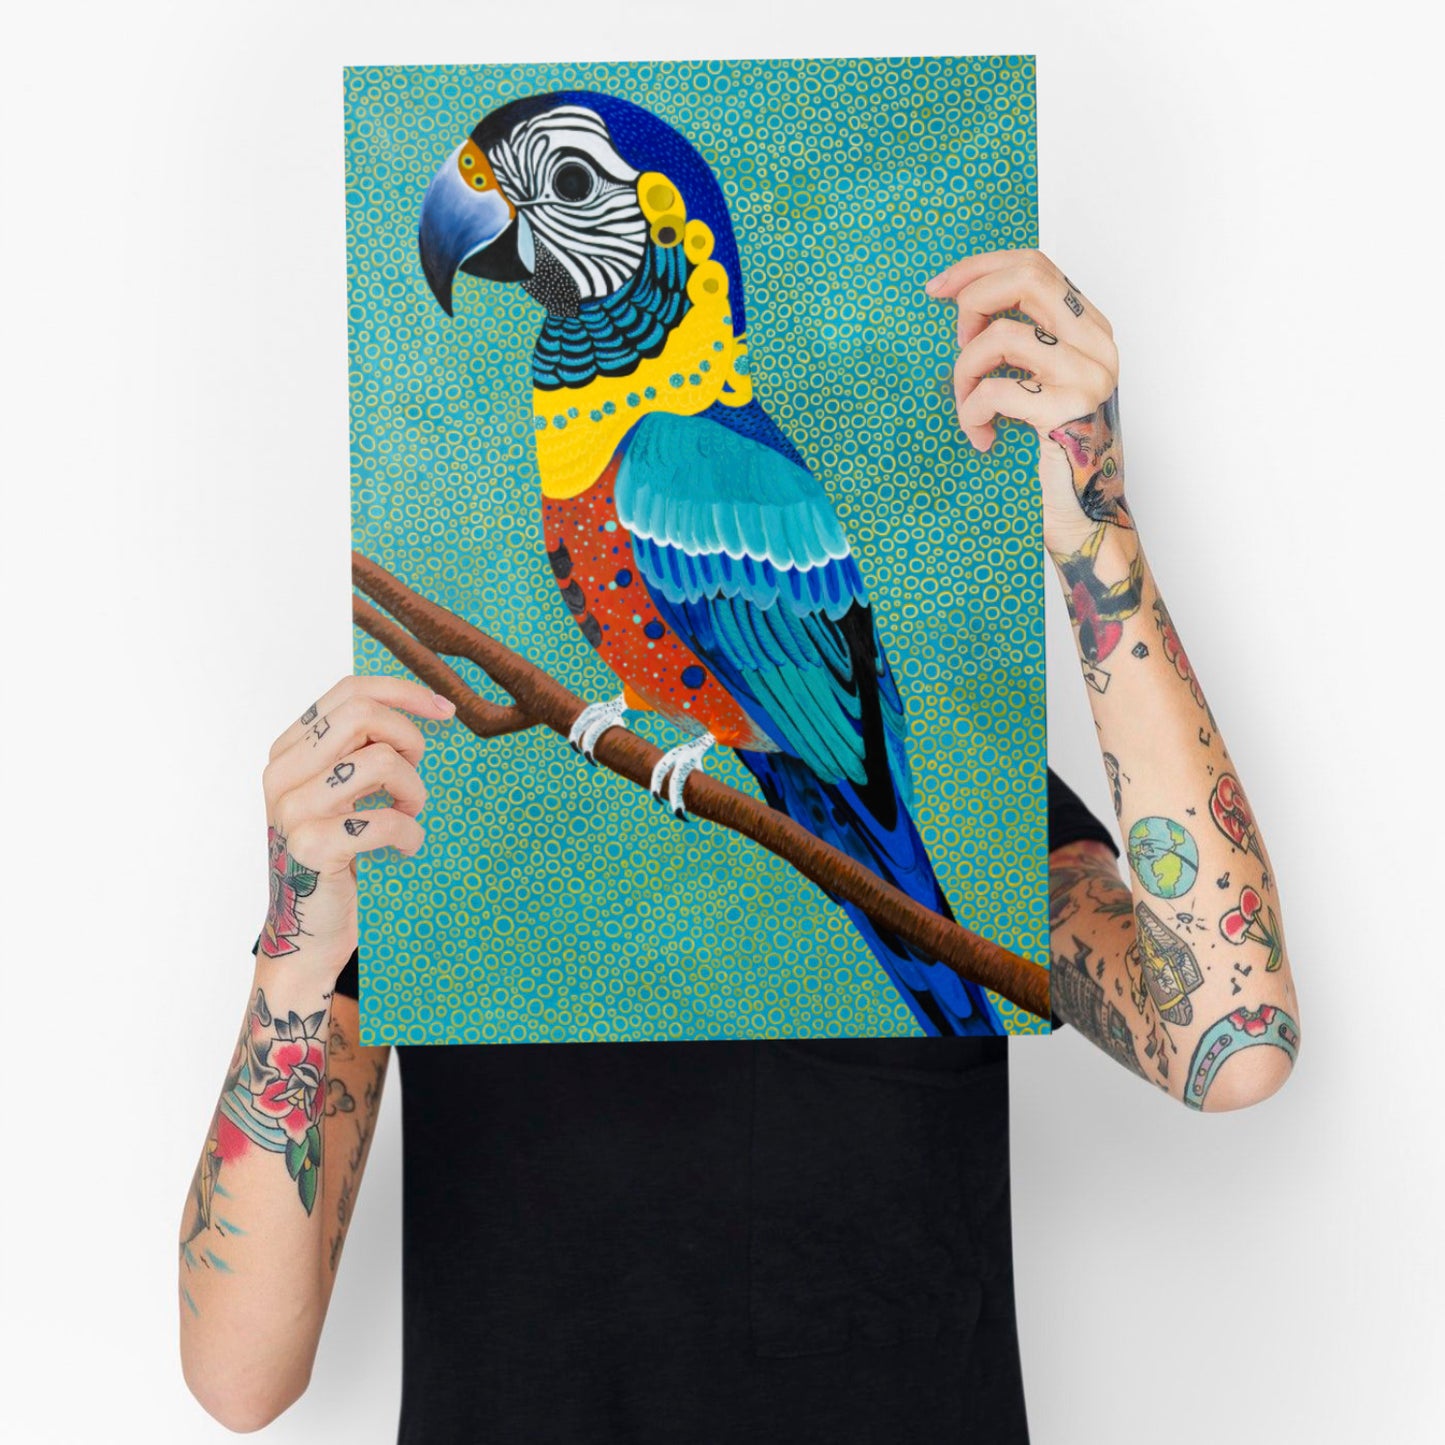 Macaw parrot limited edition print